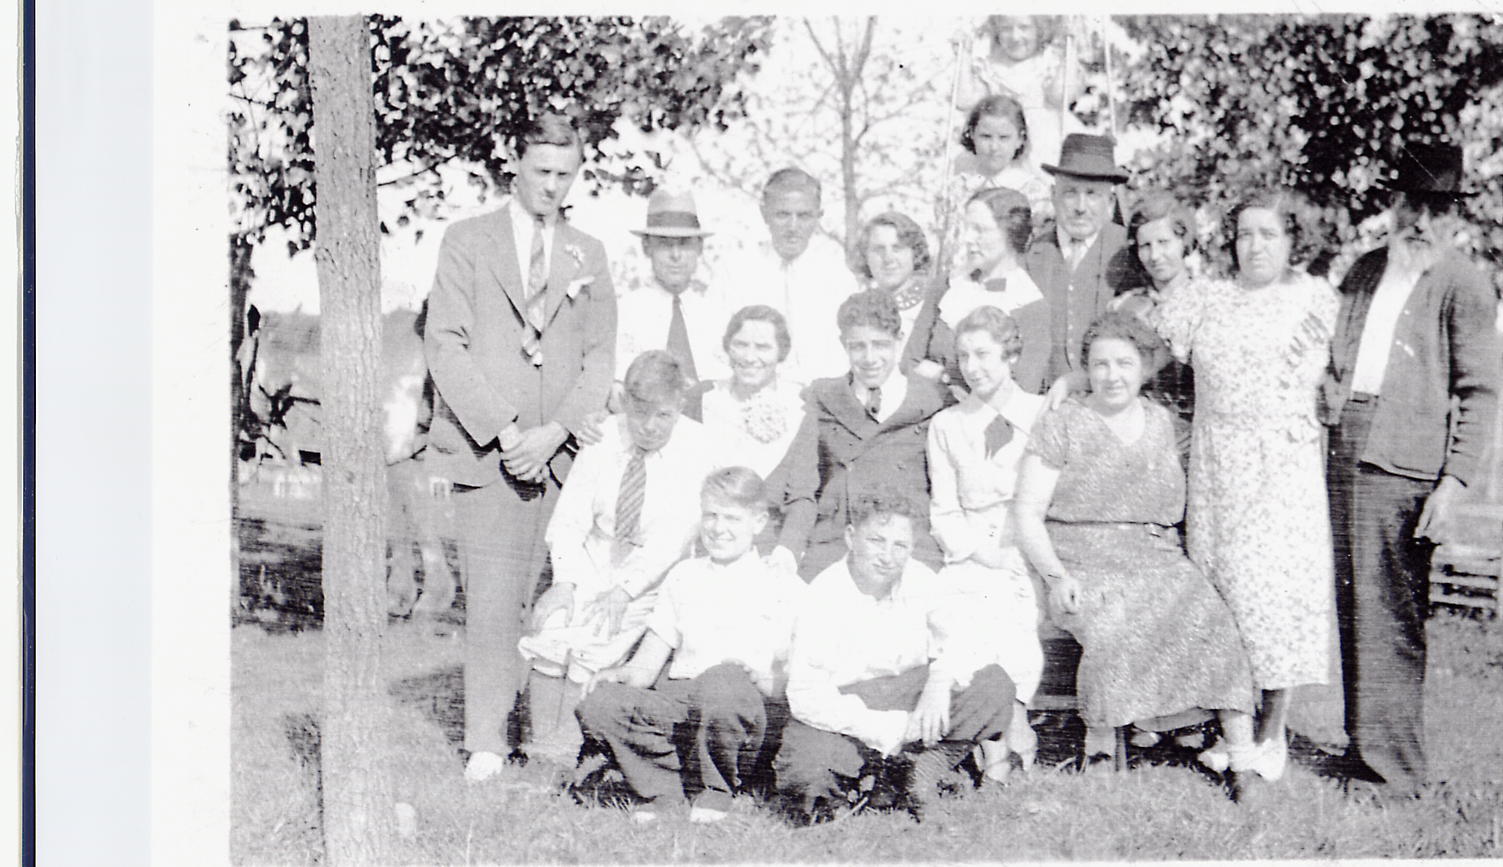 A GELB FAMILY GATHERING, POSSIBLY AT THE GELB BROTHERS KOSHER HOTEL, THE LAKE VIEW HOUSE, IN ELLENVILLE, NEW YORK. HENRY GELB IS 2ND FROM THE LEFT. HIS UNCLE JOSEPH GELB WORE A HAT, TOWARDS THE MIDDLE OF THE PICTURE. JOSEPHS DAUGHTER, TILLIE, IS THE LAST ONE SEATED ON THE RIGHT. ELIAS, HENRYS FATHER, IS ON THE FAR RIGHT. TILLIES BROTHER, GUSSIE PRINCE, IS THE 2ND FROM THE RIGHT. TILLIES SON, ARTHUR, IS KNEELING IN THE CENTER. PLEASE HELP TO IDENTIFY EVERYONE ELSE IN THIS PICTURE.